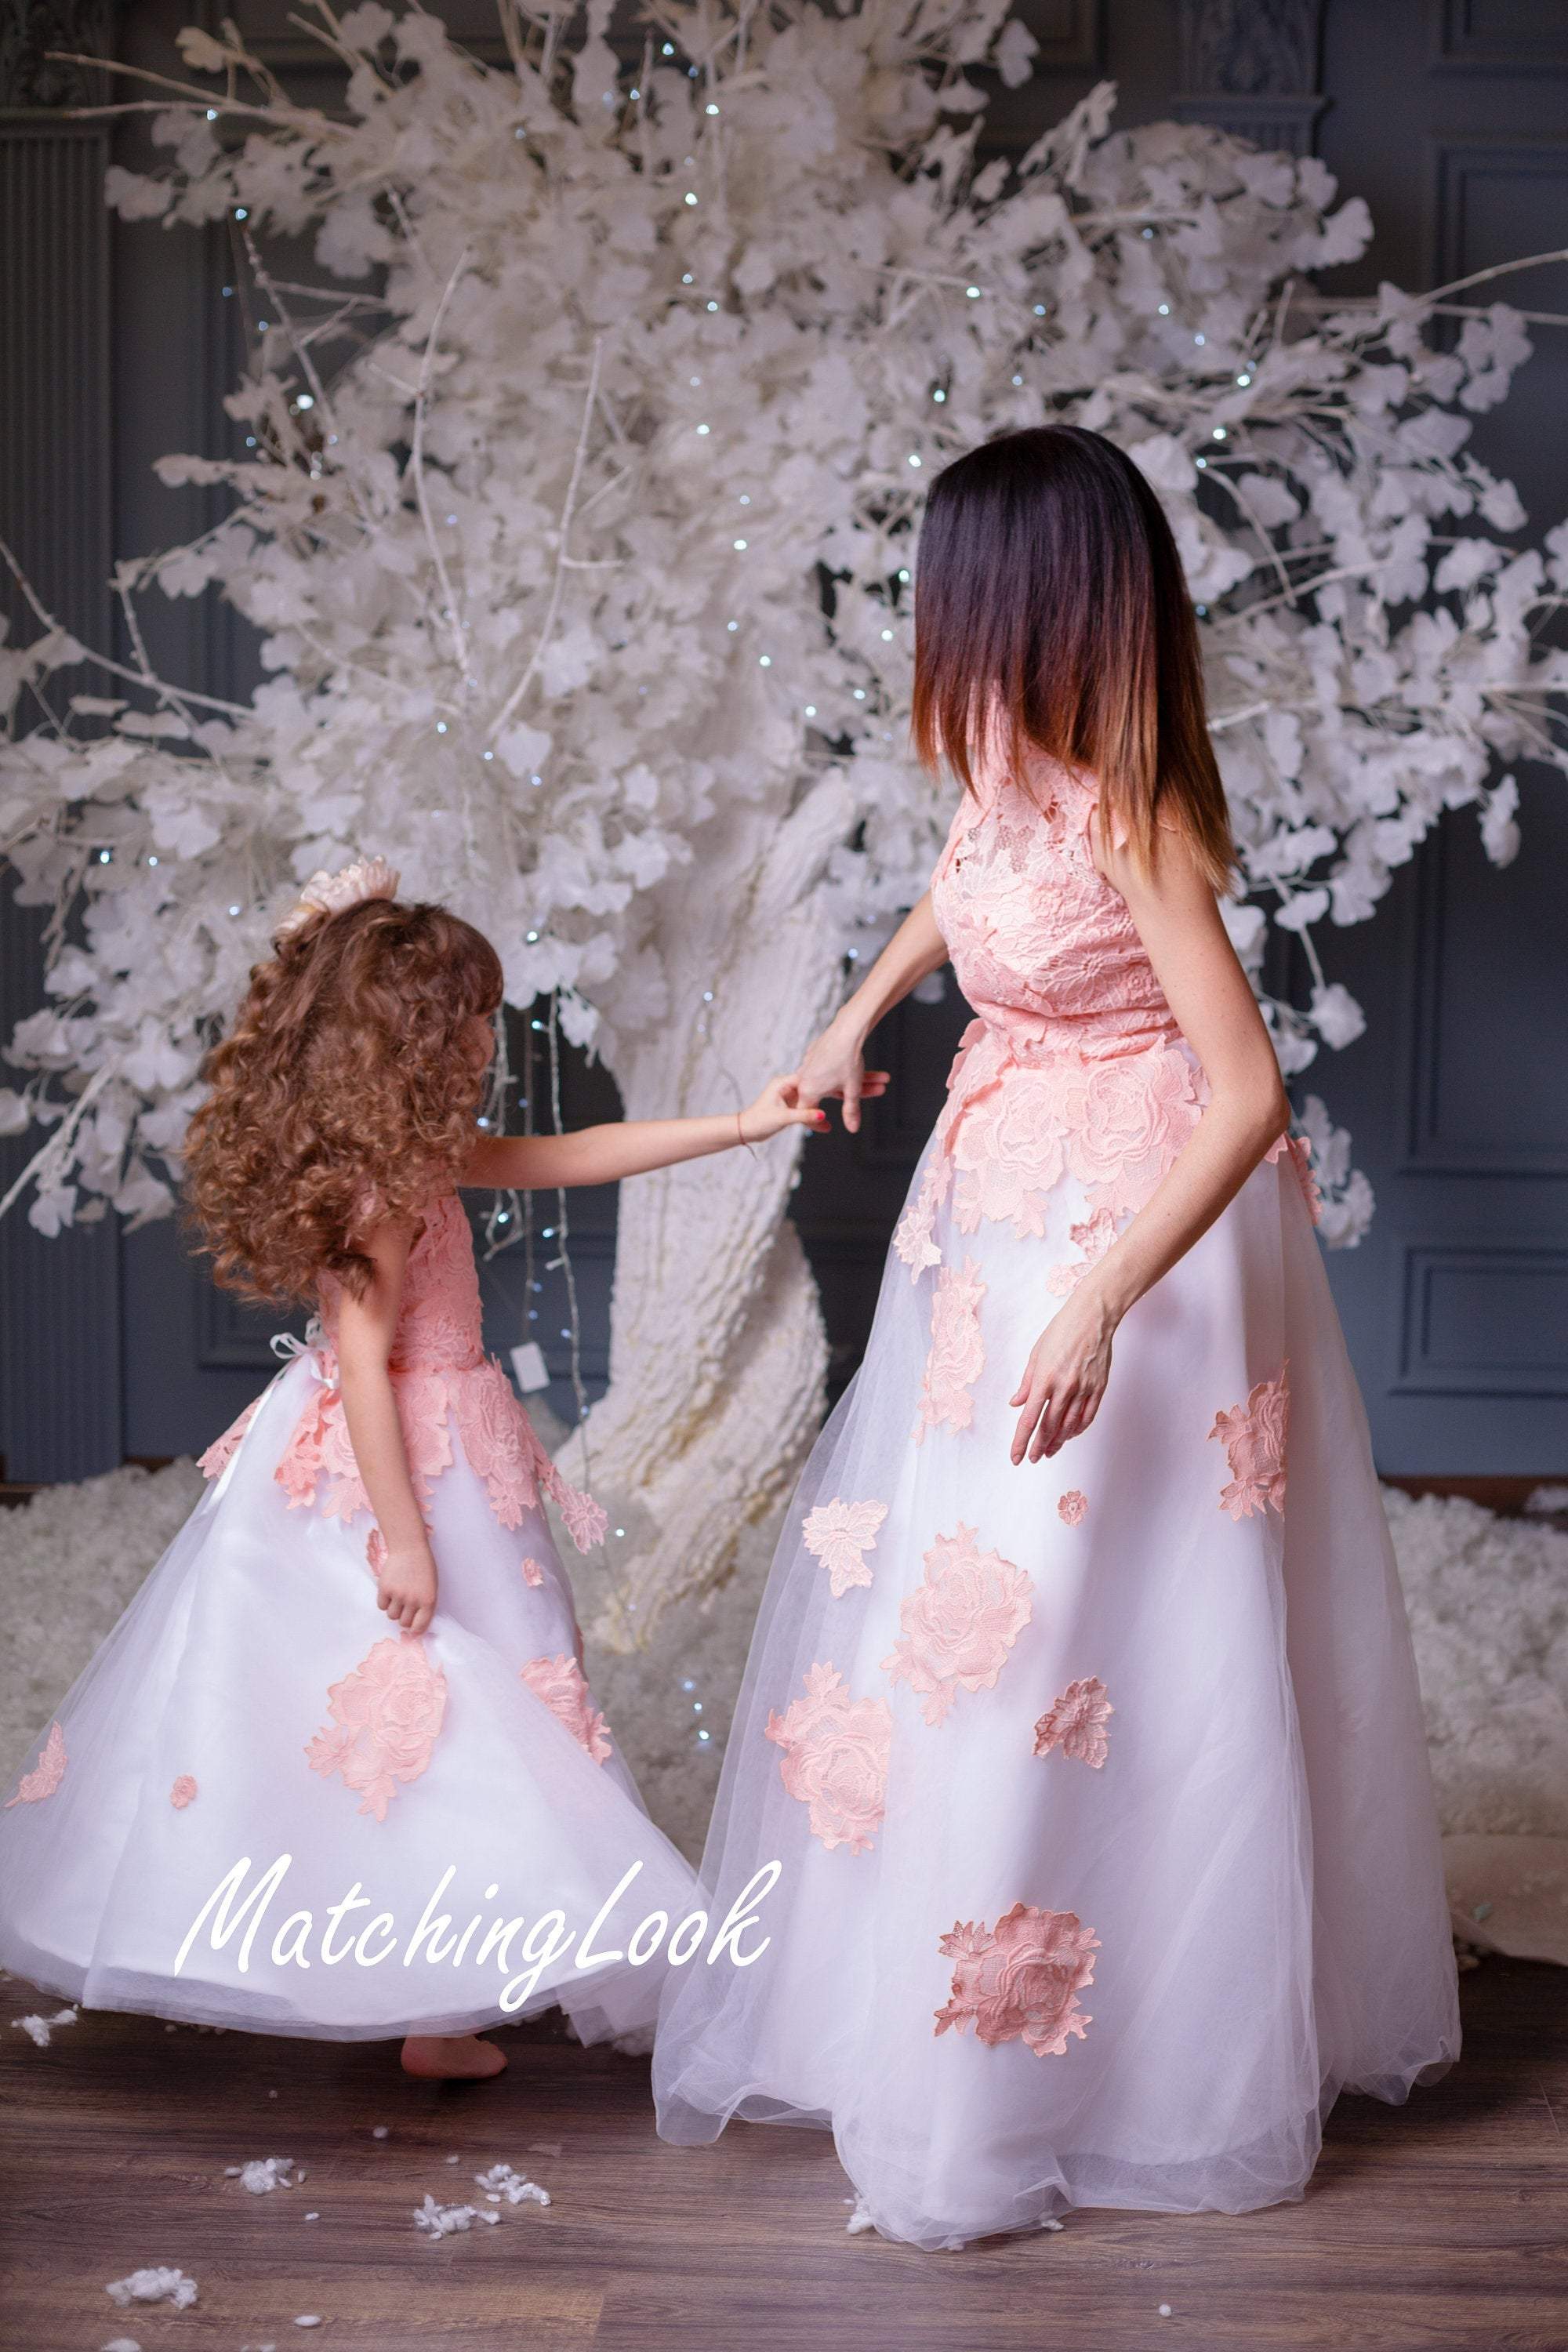 Matching mother daughter wedding fit and flare dresses in white color